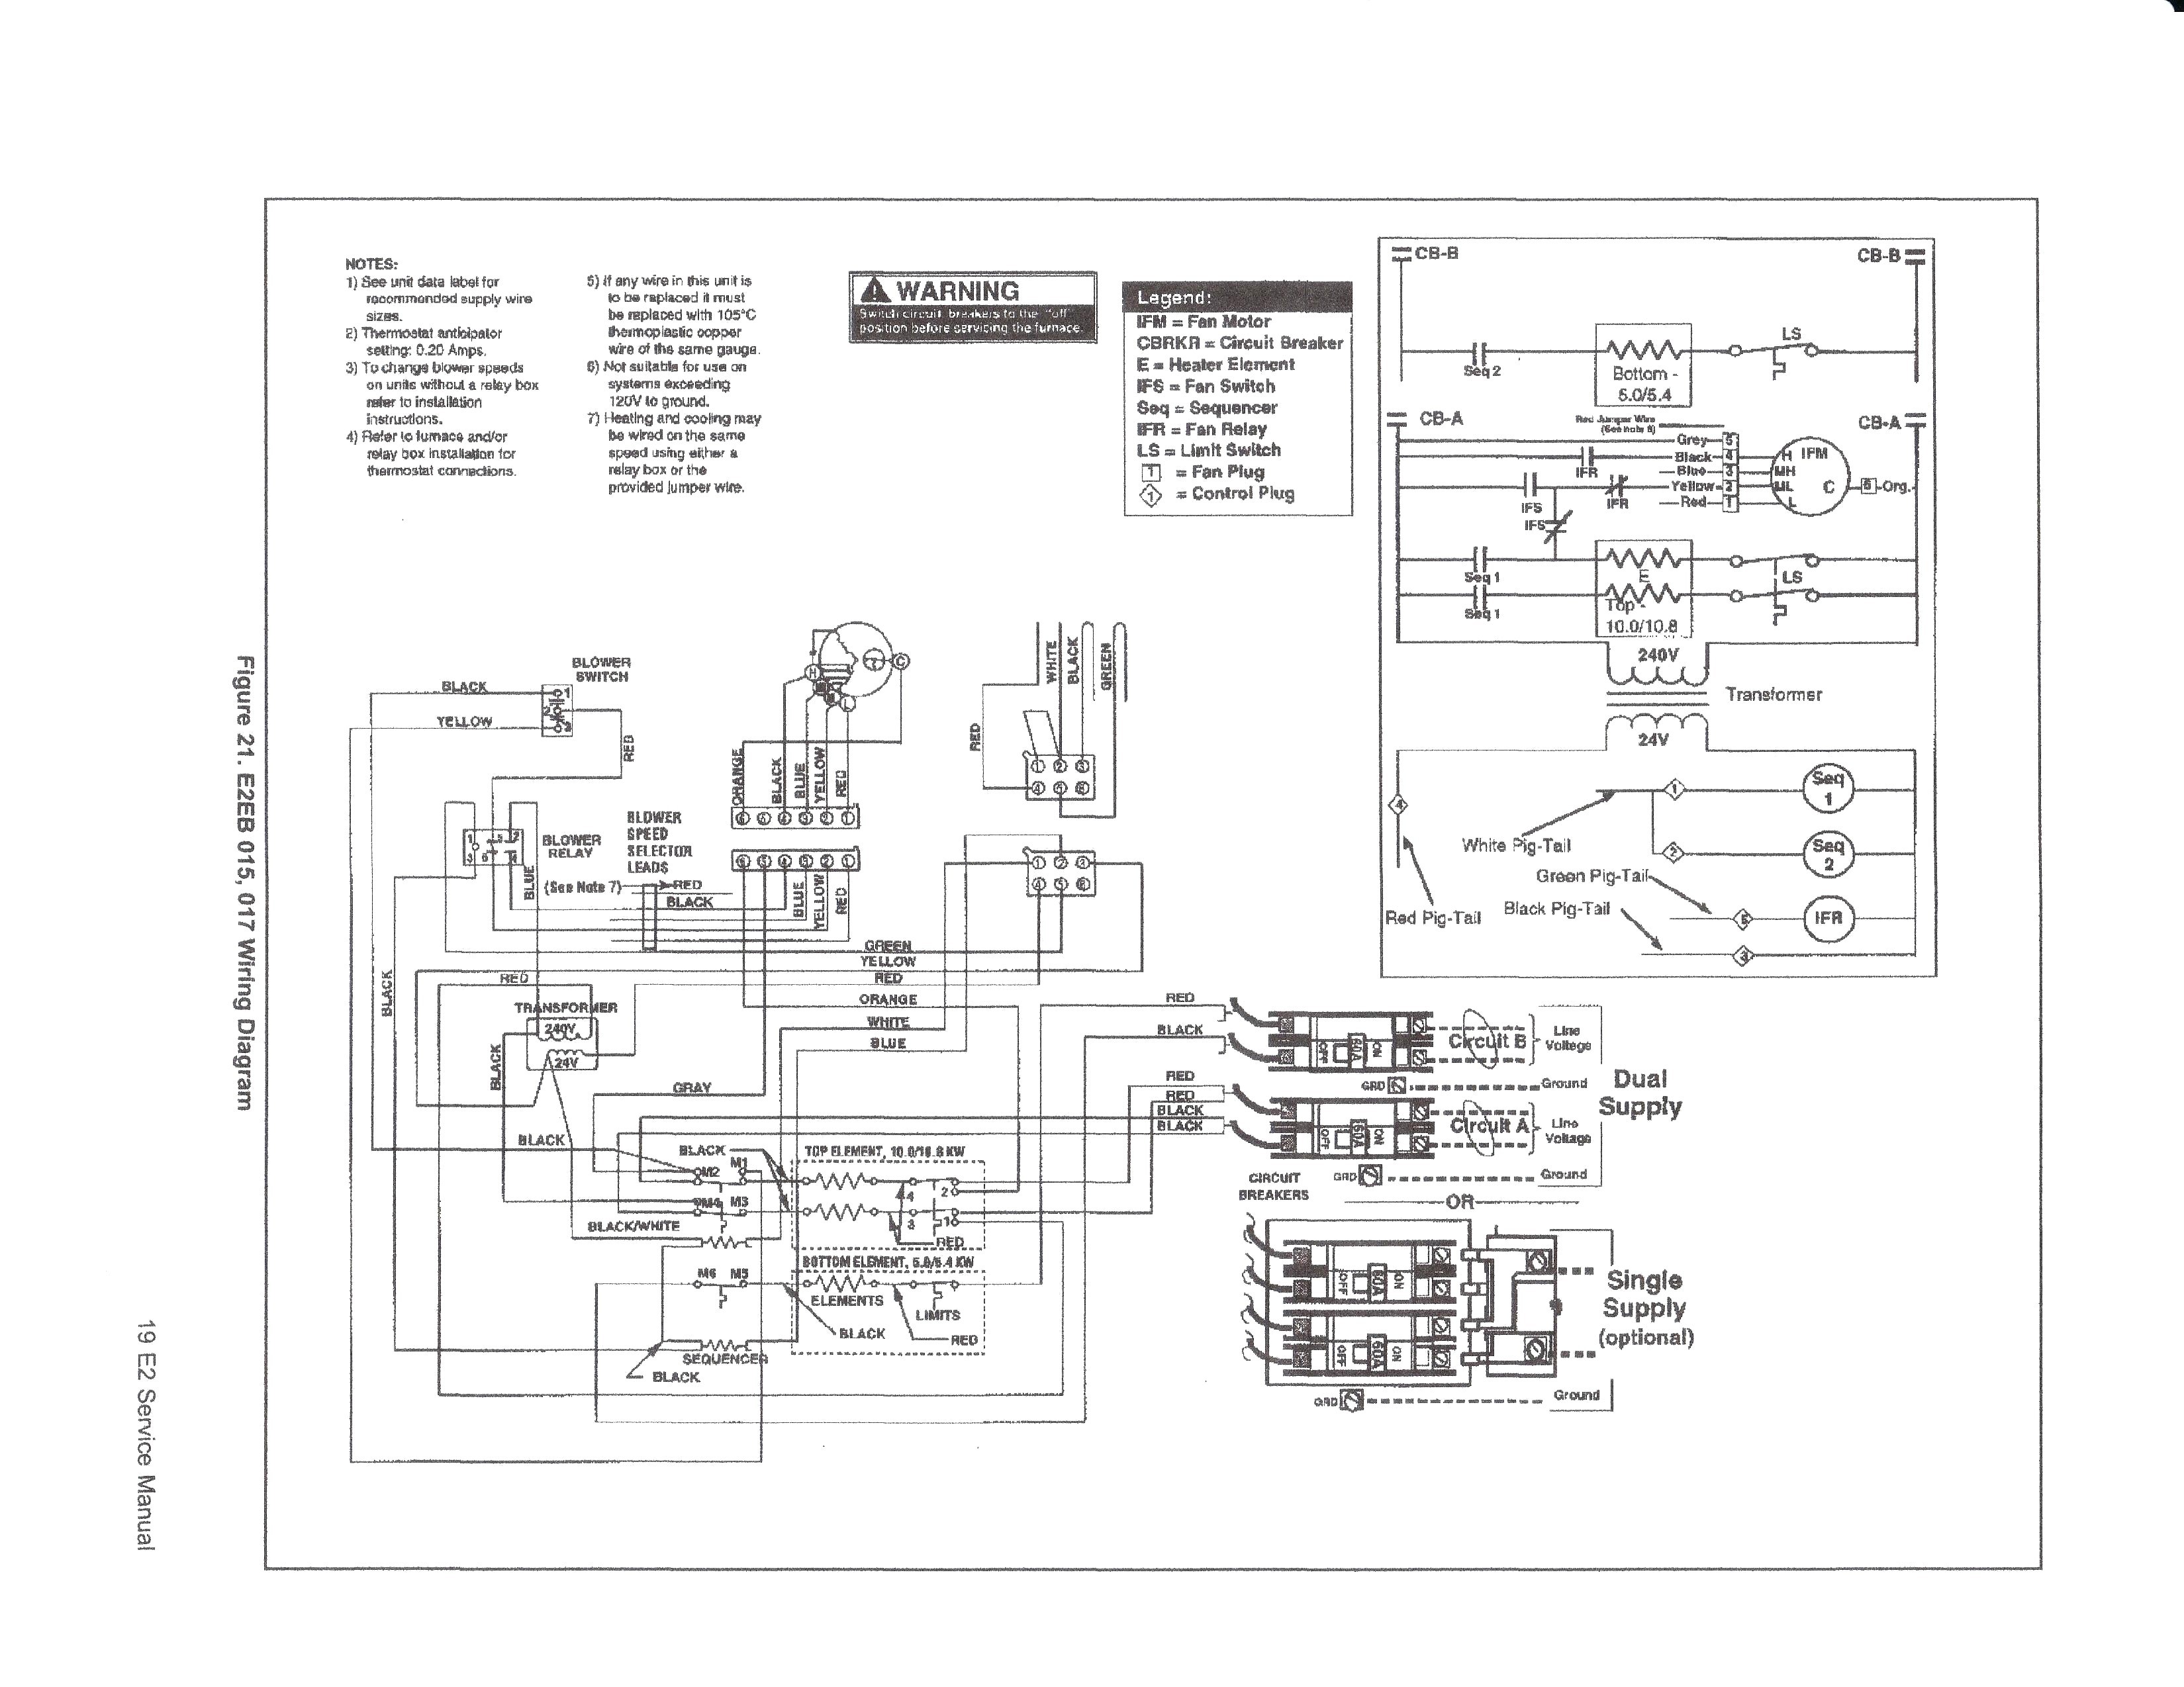 Wiring Diagram for Hvac thermostat Save Oil Burner Wiring Diagram Furthermore Wire Furnace thermostat Wiring